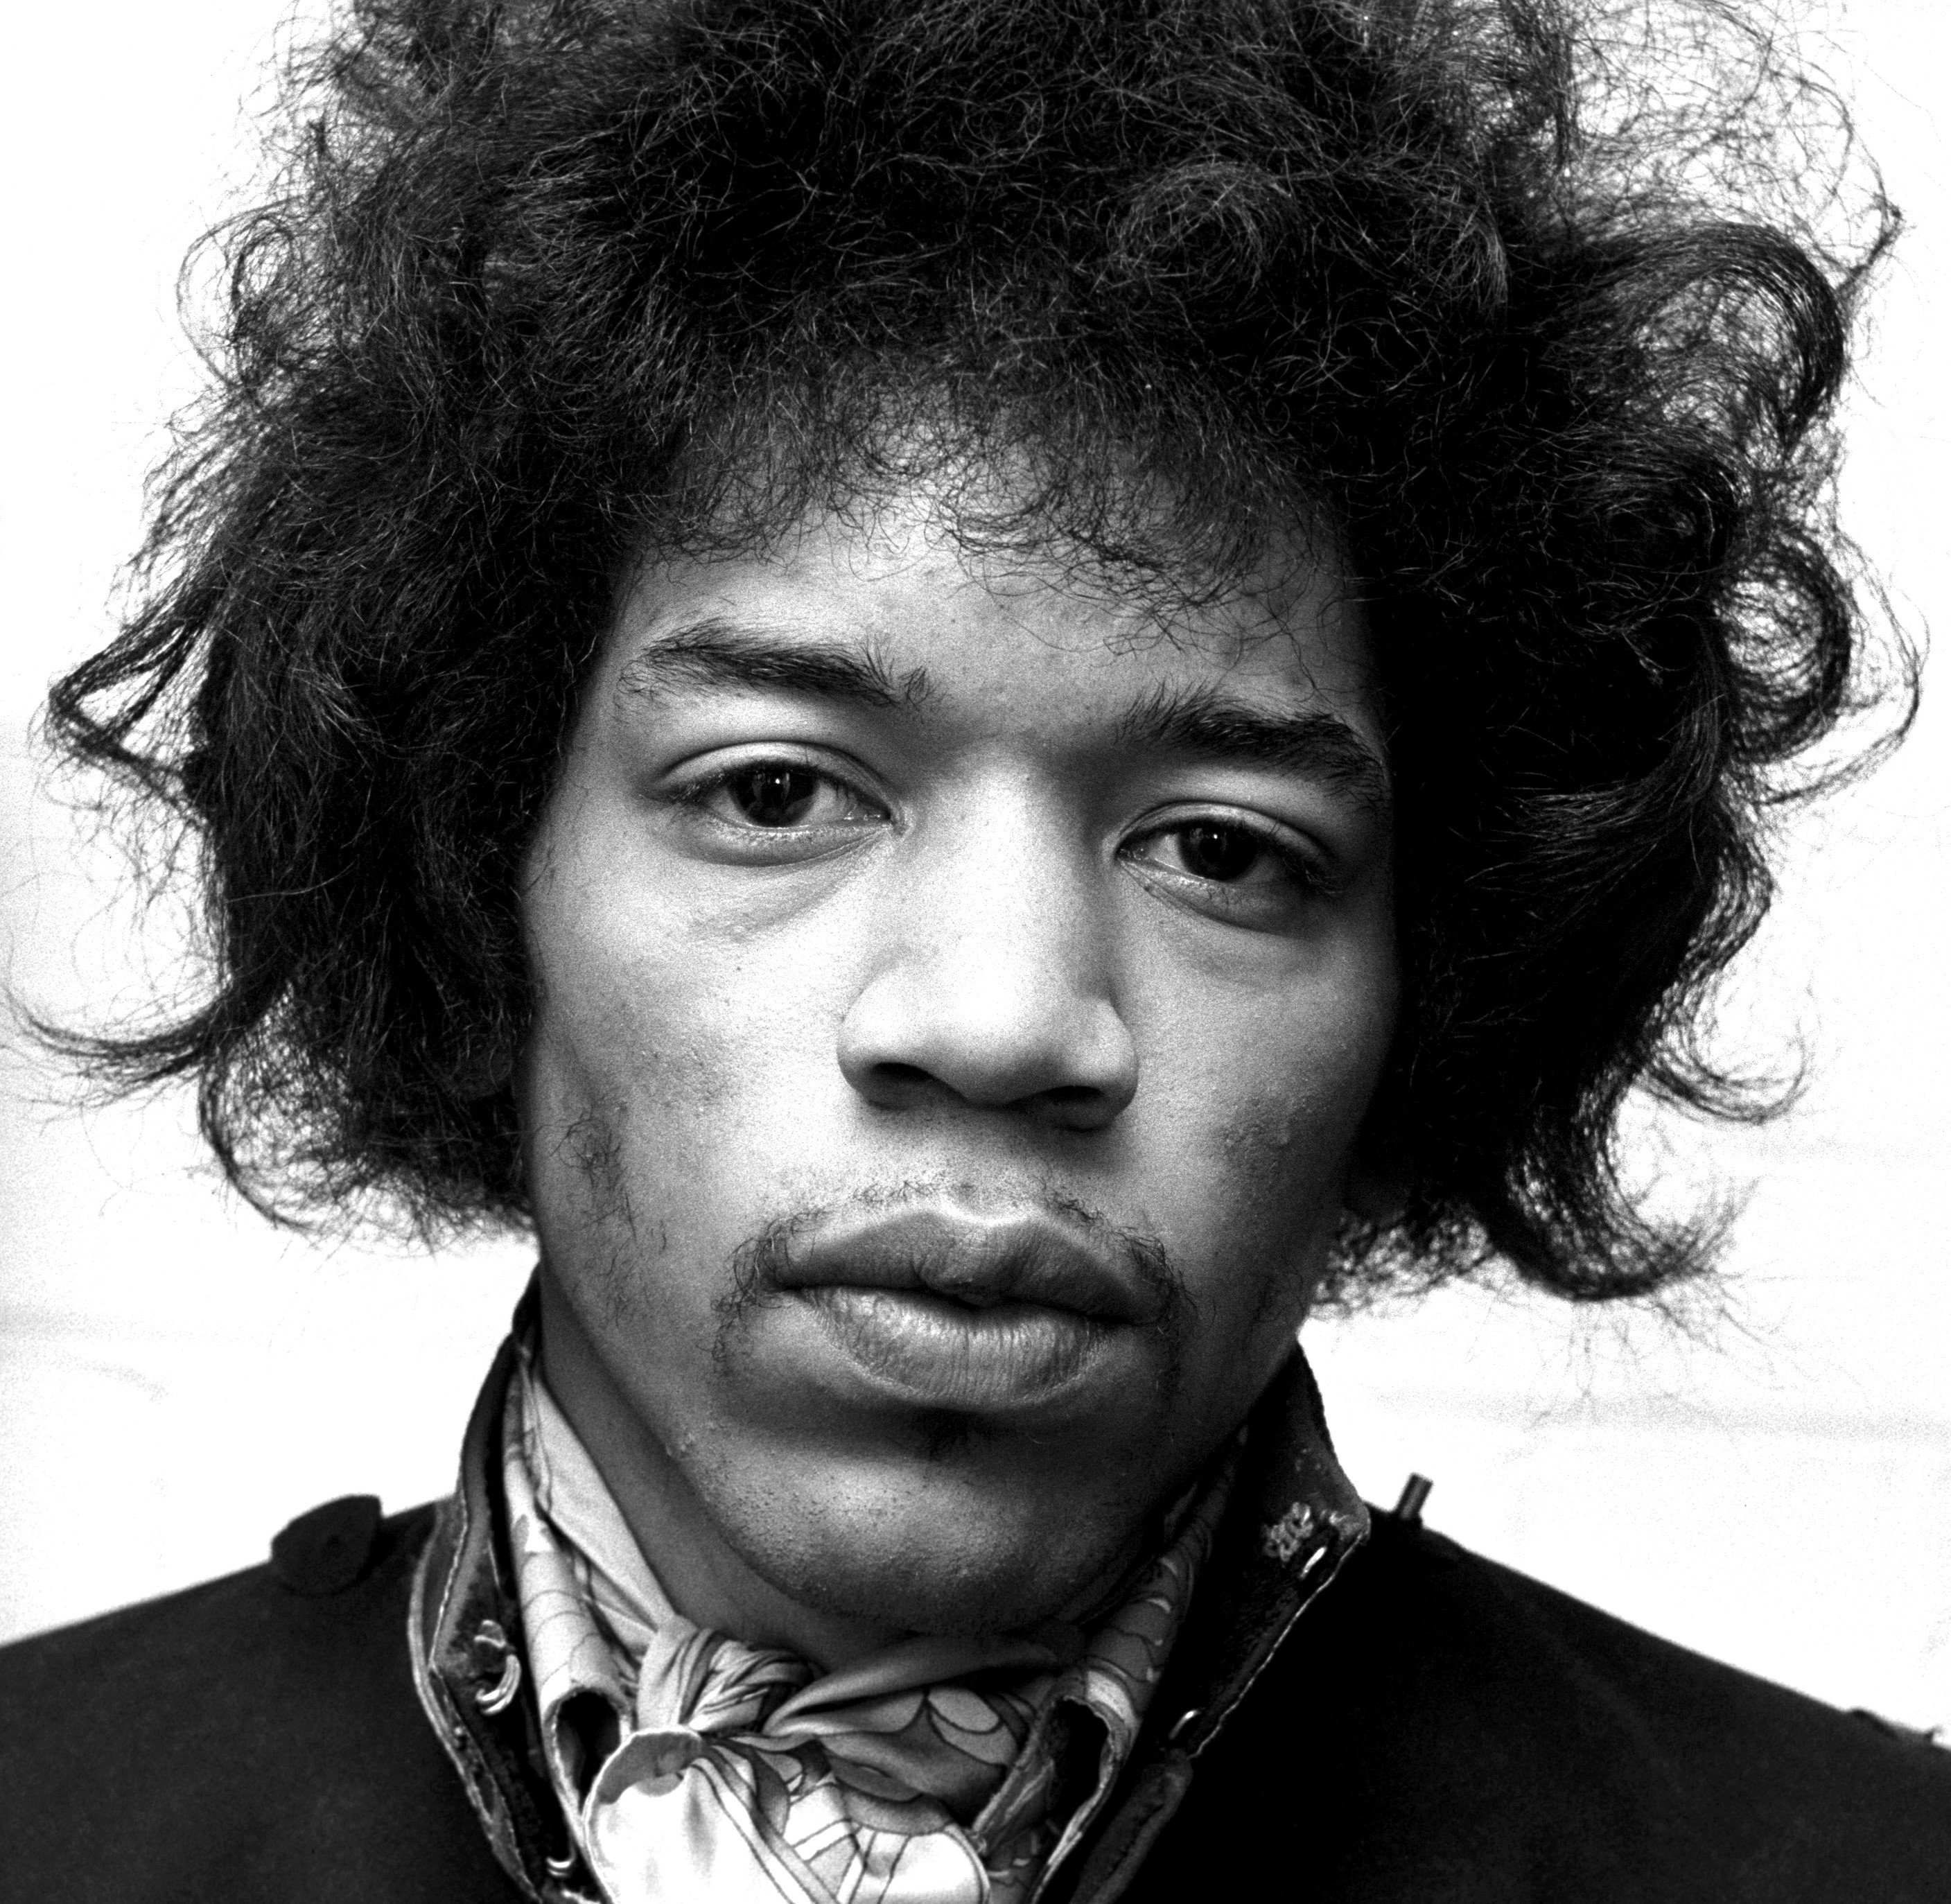 Jimi Hendrix looking at a camera during the "Foxy Lady" and "Purple Haze" era